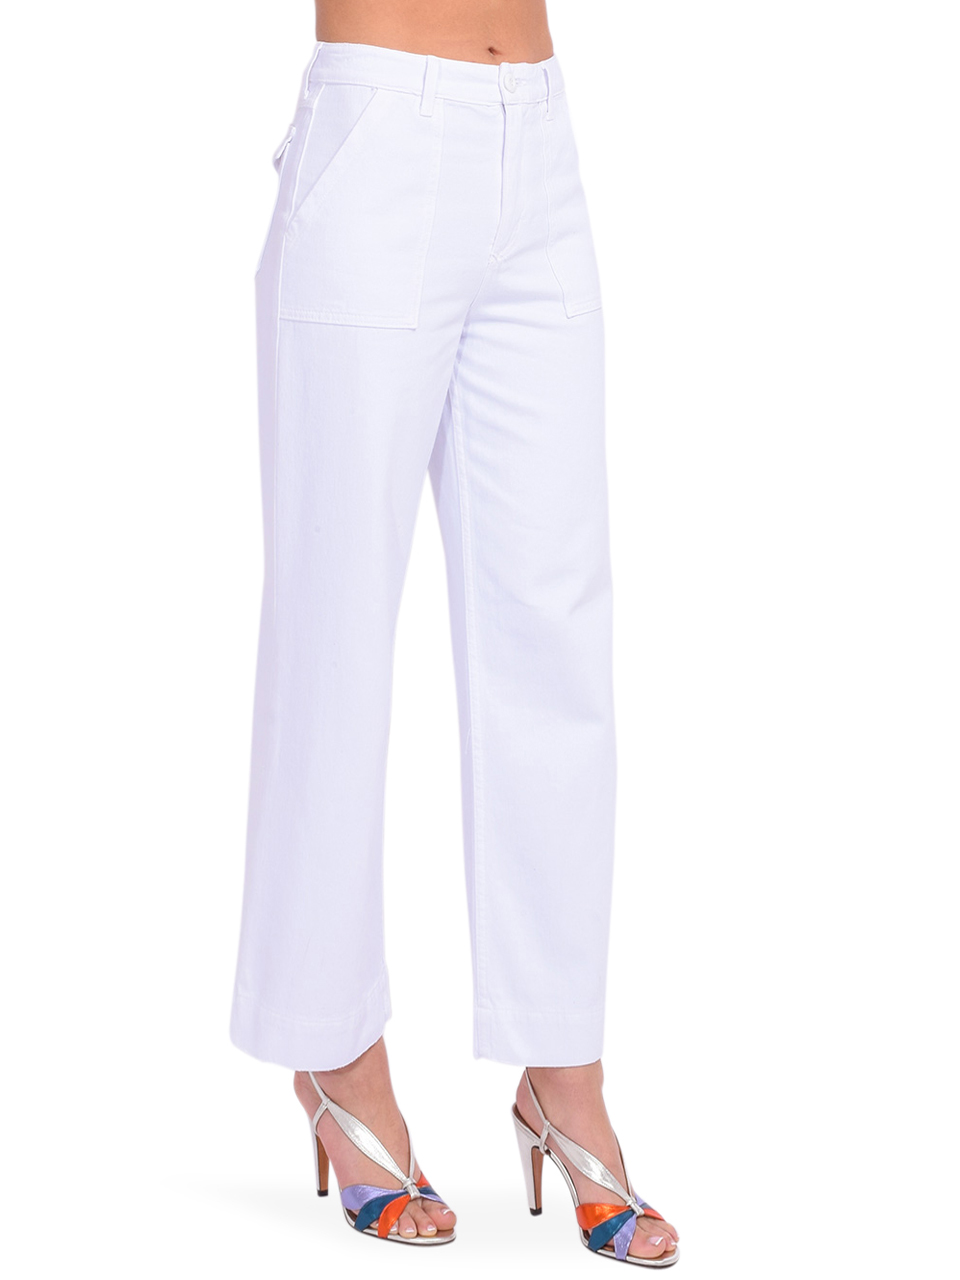 Le Superbe Moore Pant in White Side View 

